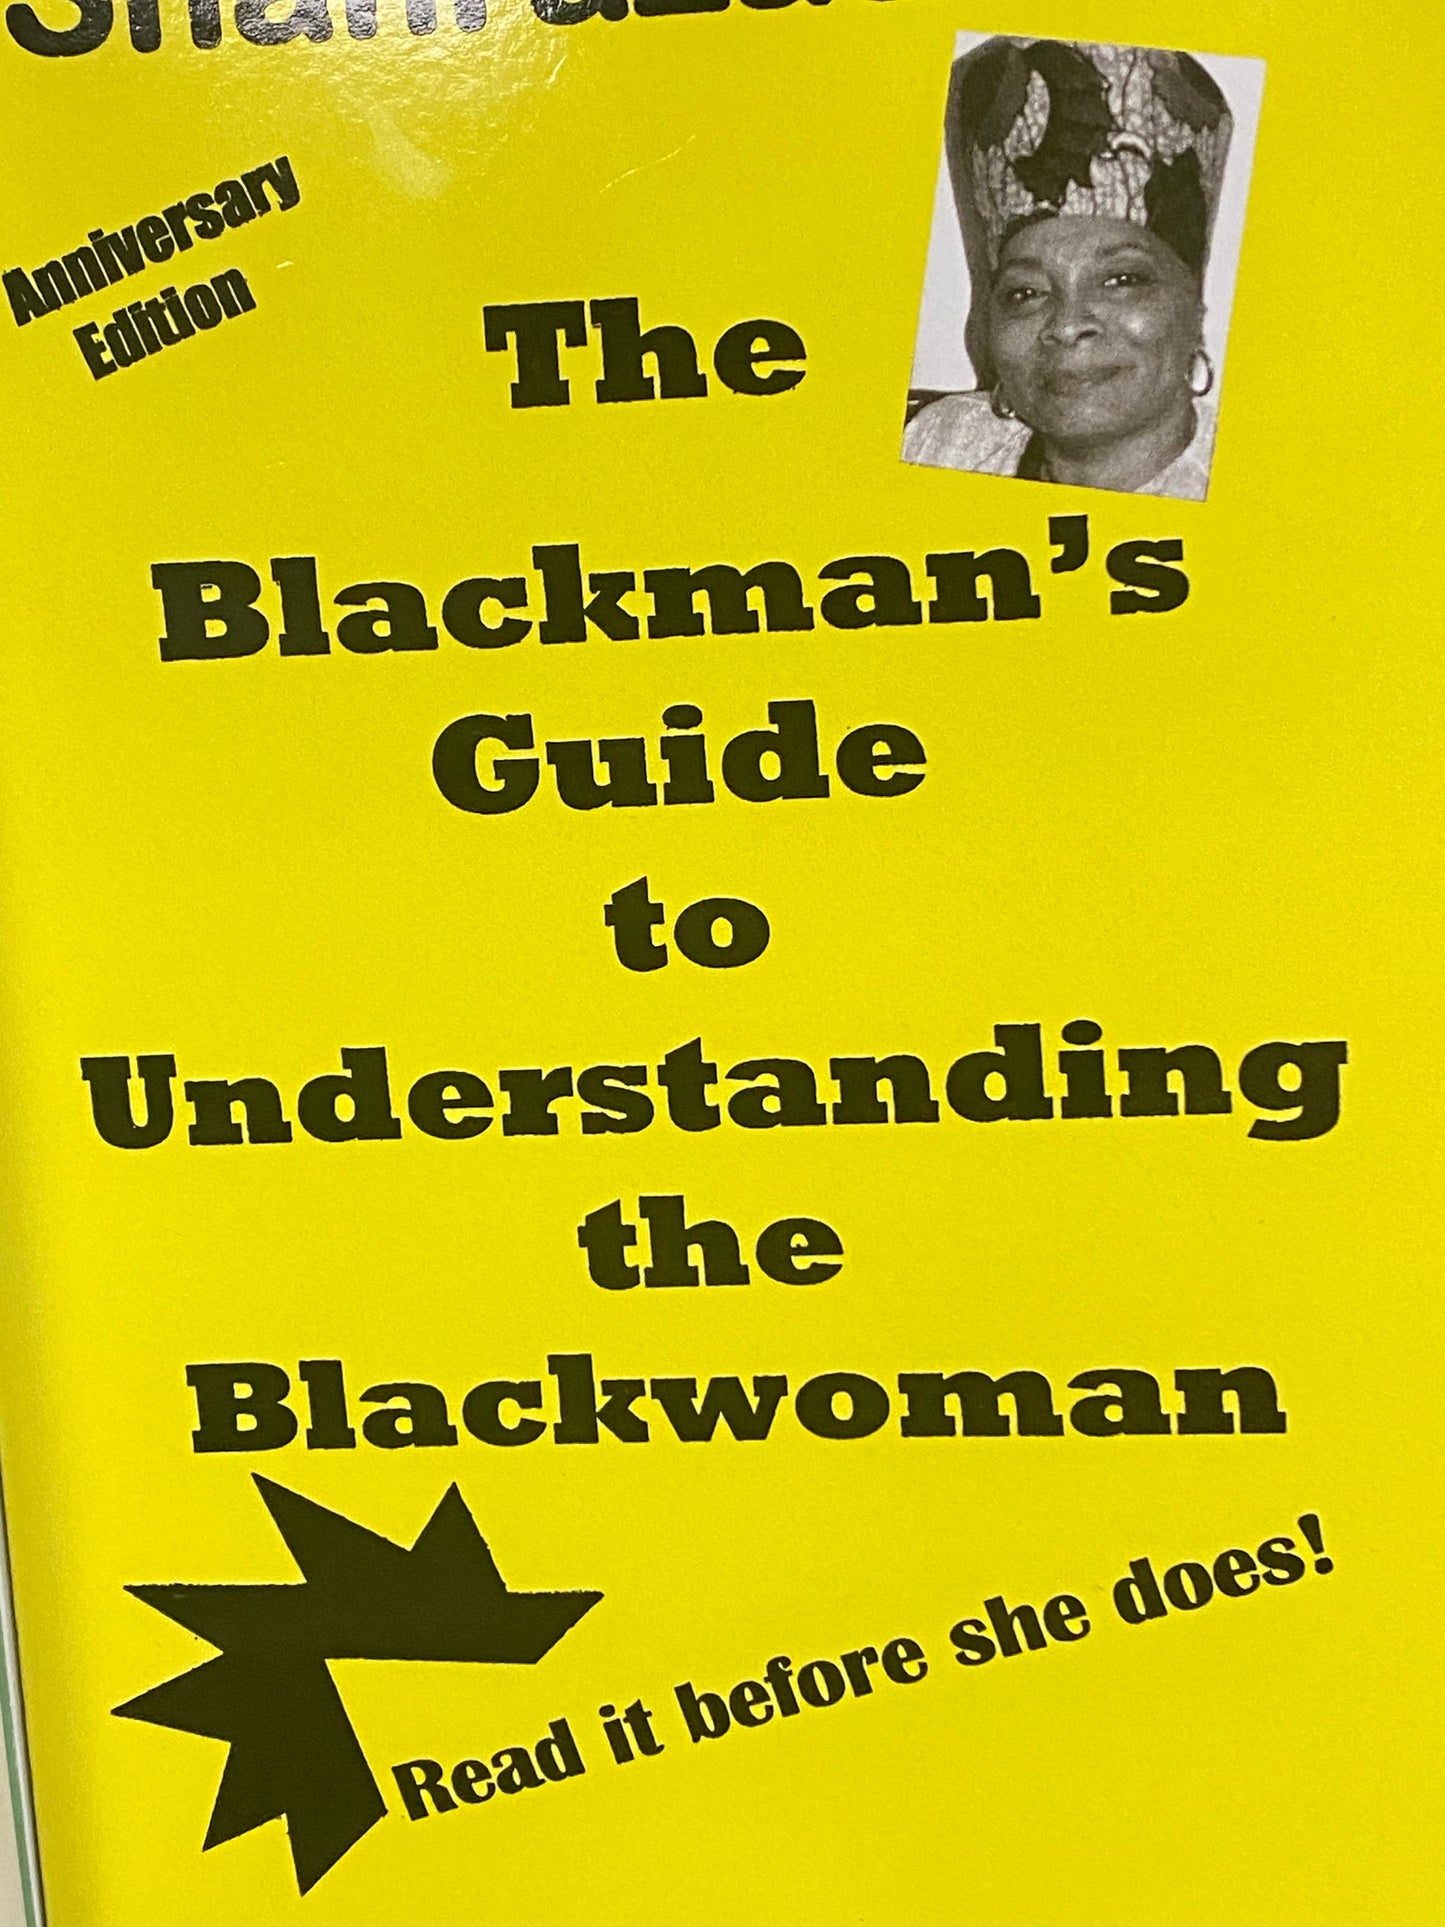 "The Blackman’s Guide to Understanding the Blackwoman" by Shahrazad Ali